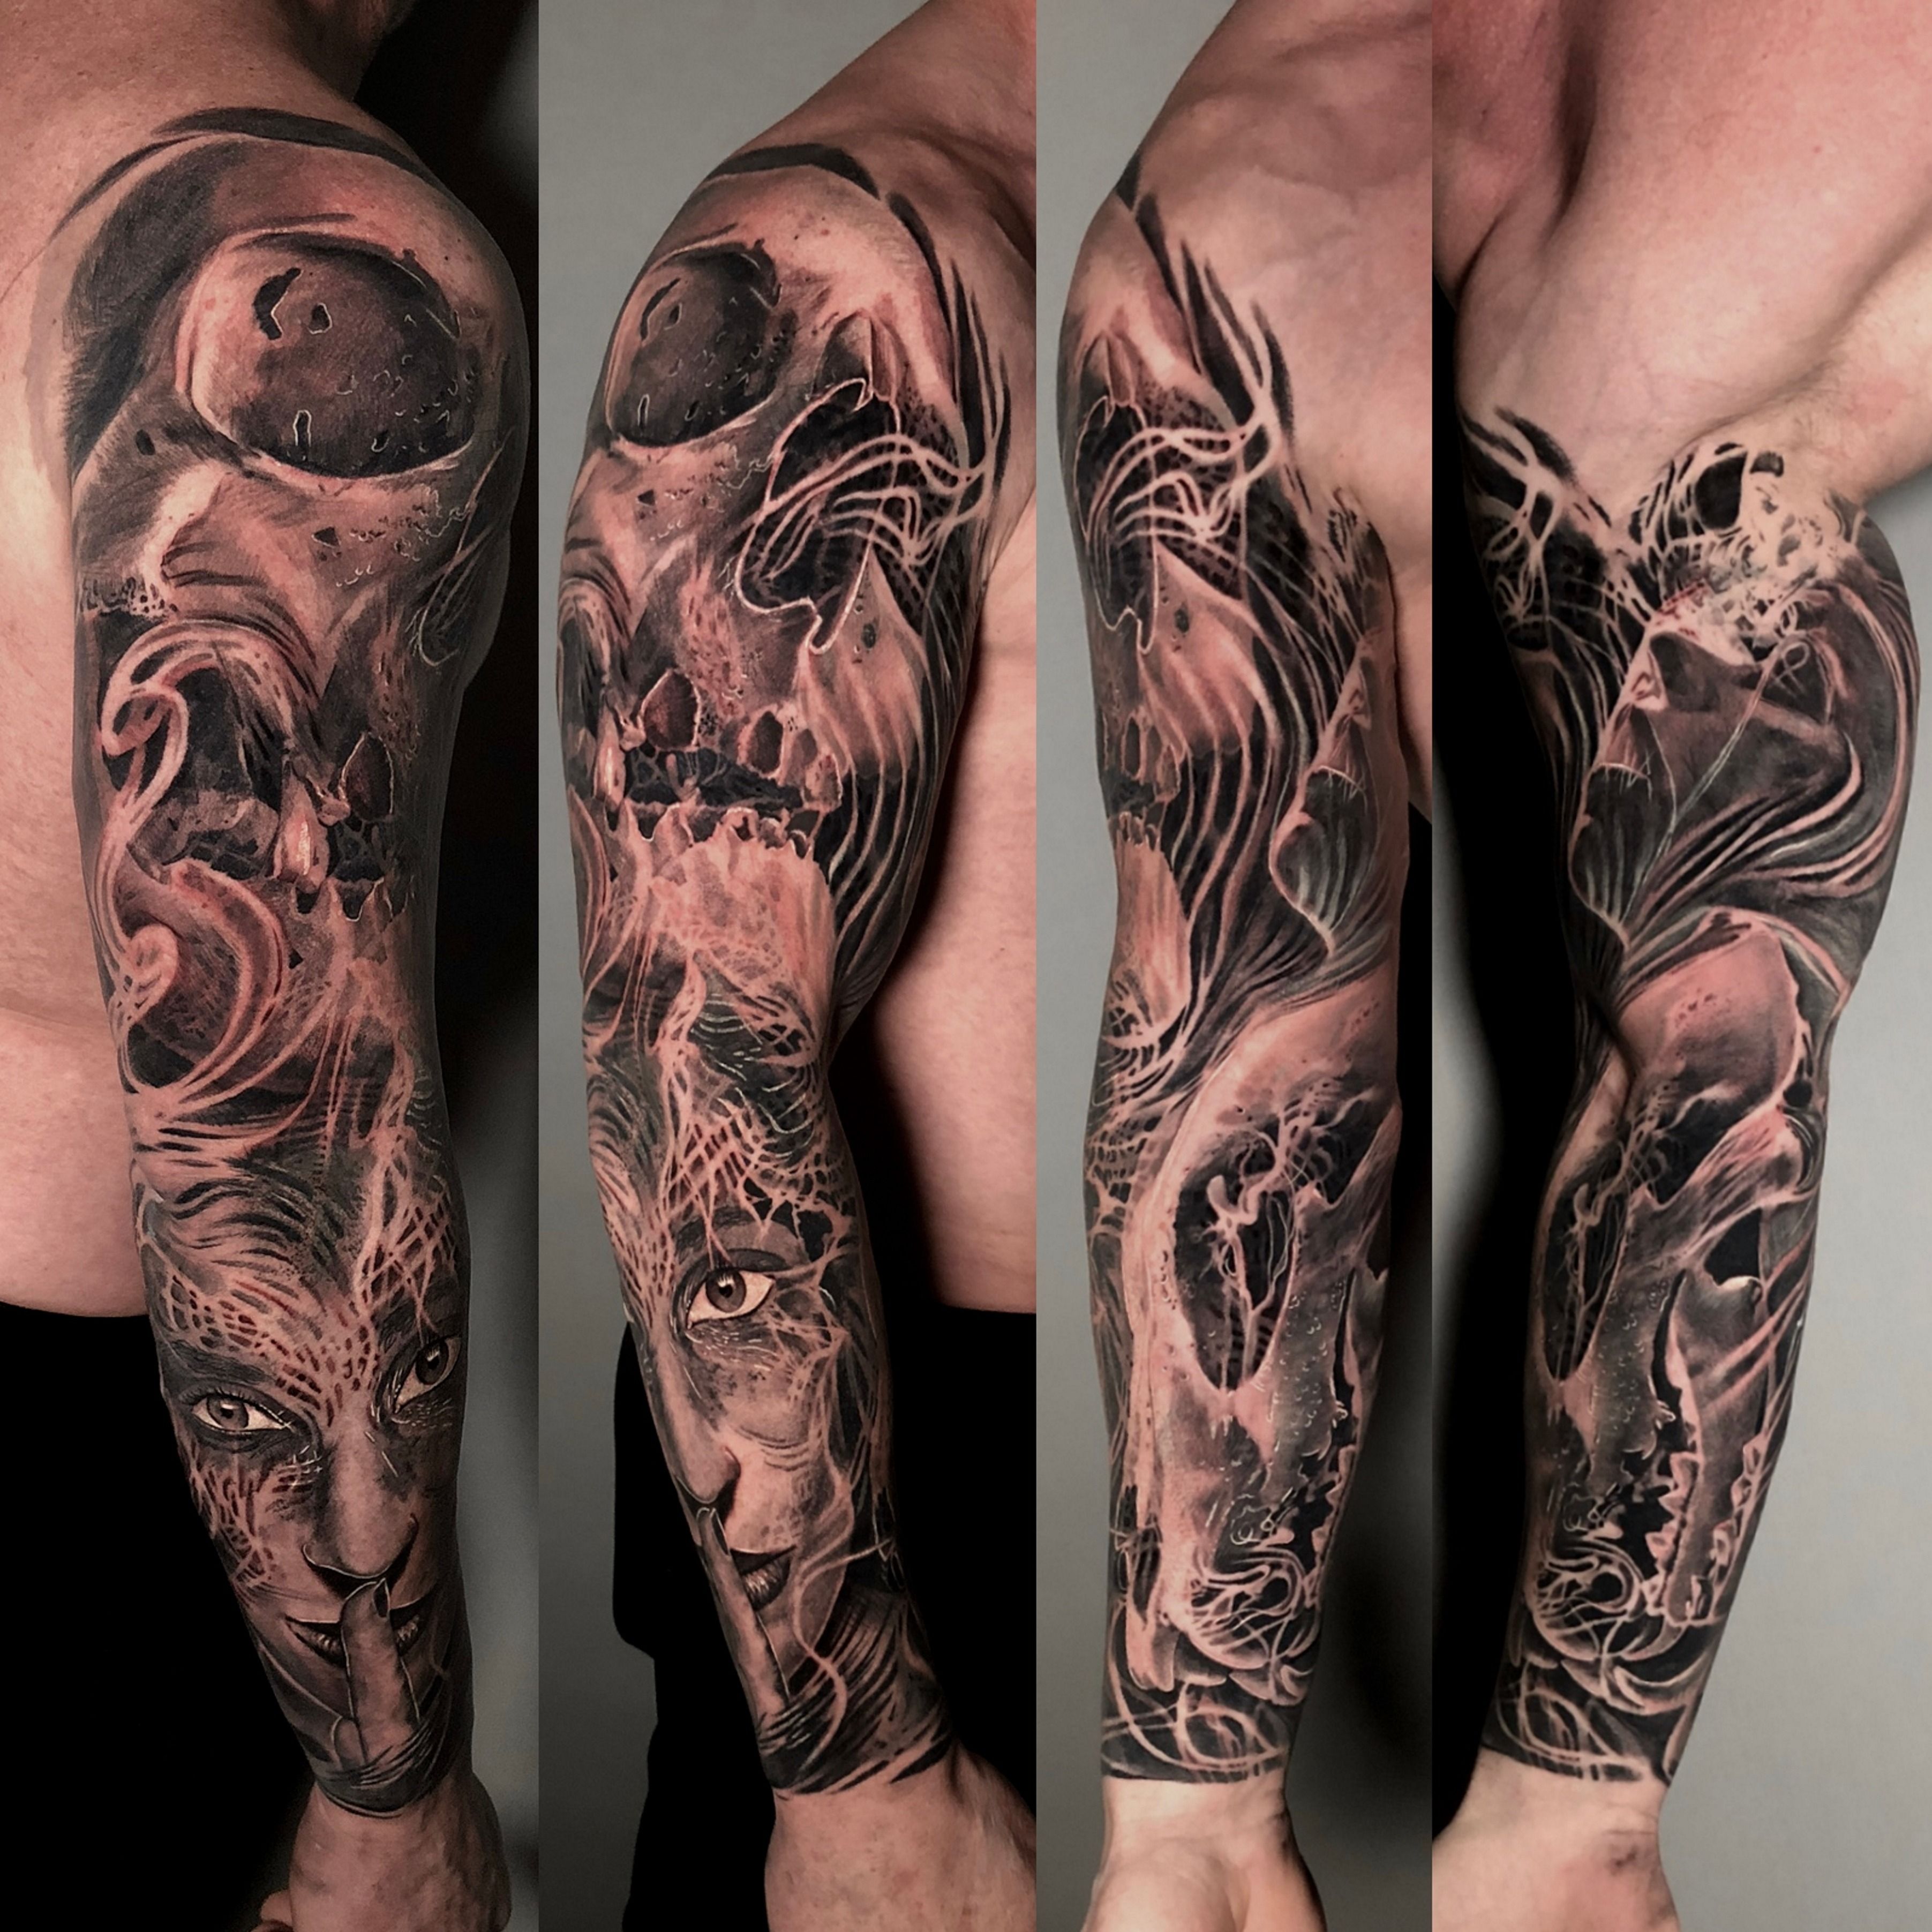 Finally finished the half sleeve Used the smoke from Constantines  cigarette to fill in all the blanks Done yesterday by Adam at Mystic  Images Tattoo Noblesville Indiana Very happy with it cant